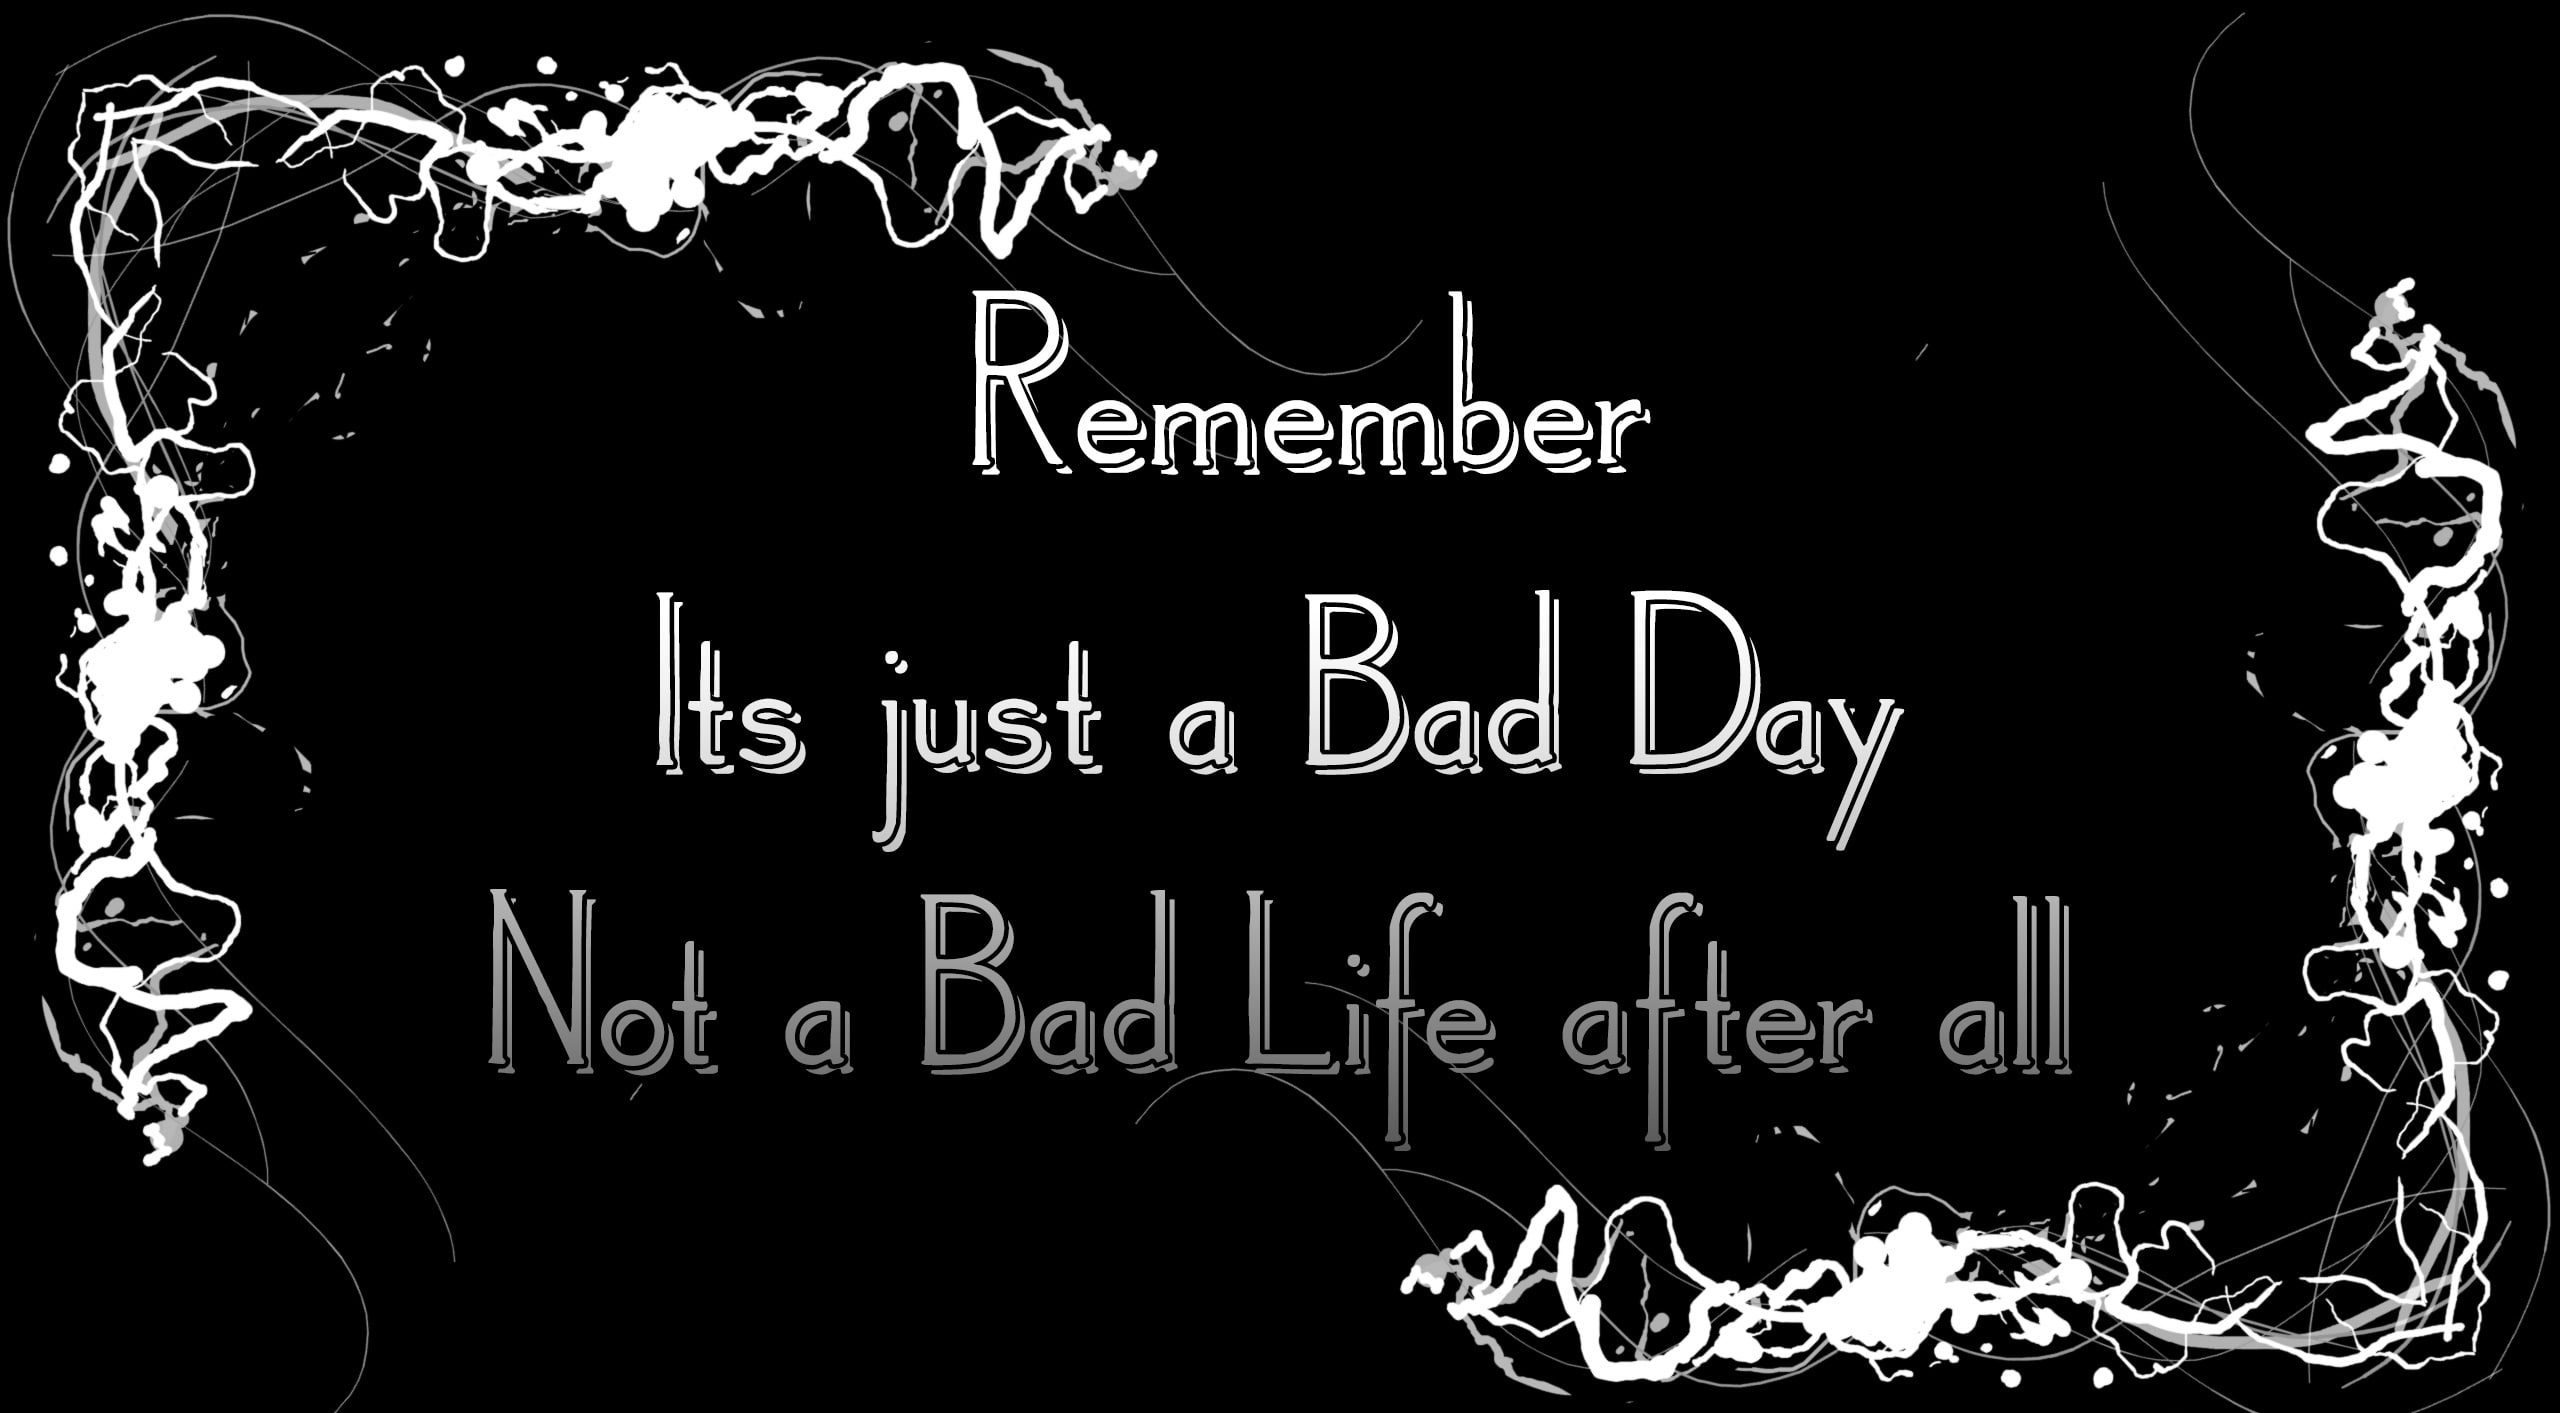 Failure Quote, remember its just a bad day not a bad life after all text quote